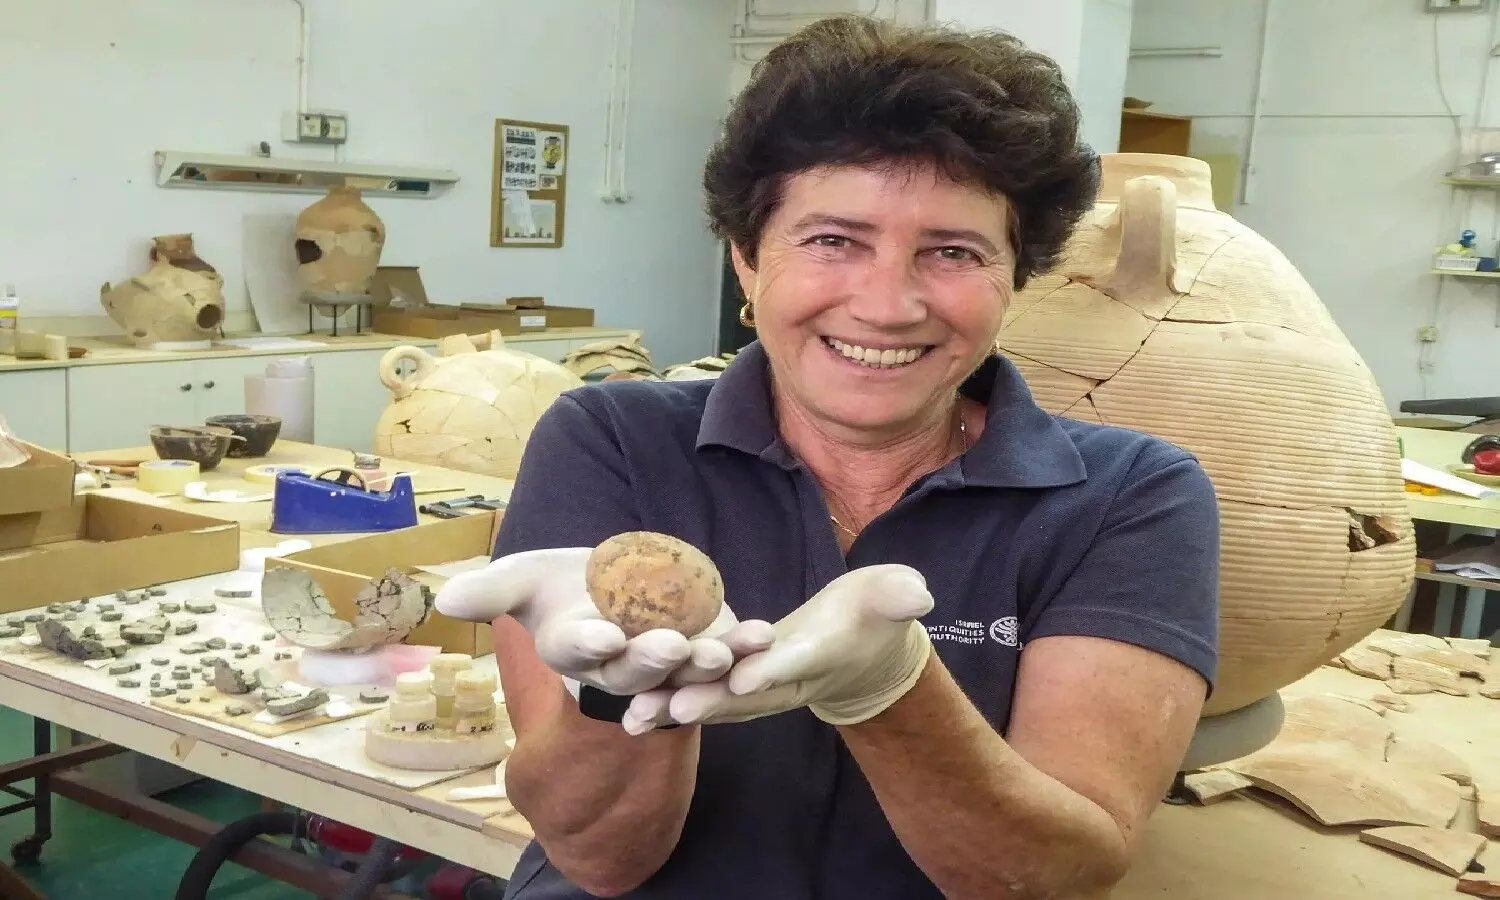 While excavating at a place in Israel, about 1000 years old chicken egg has been found.